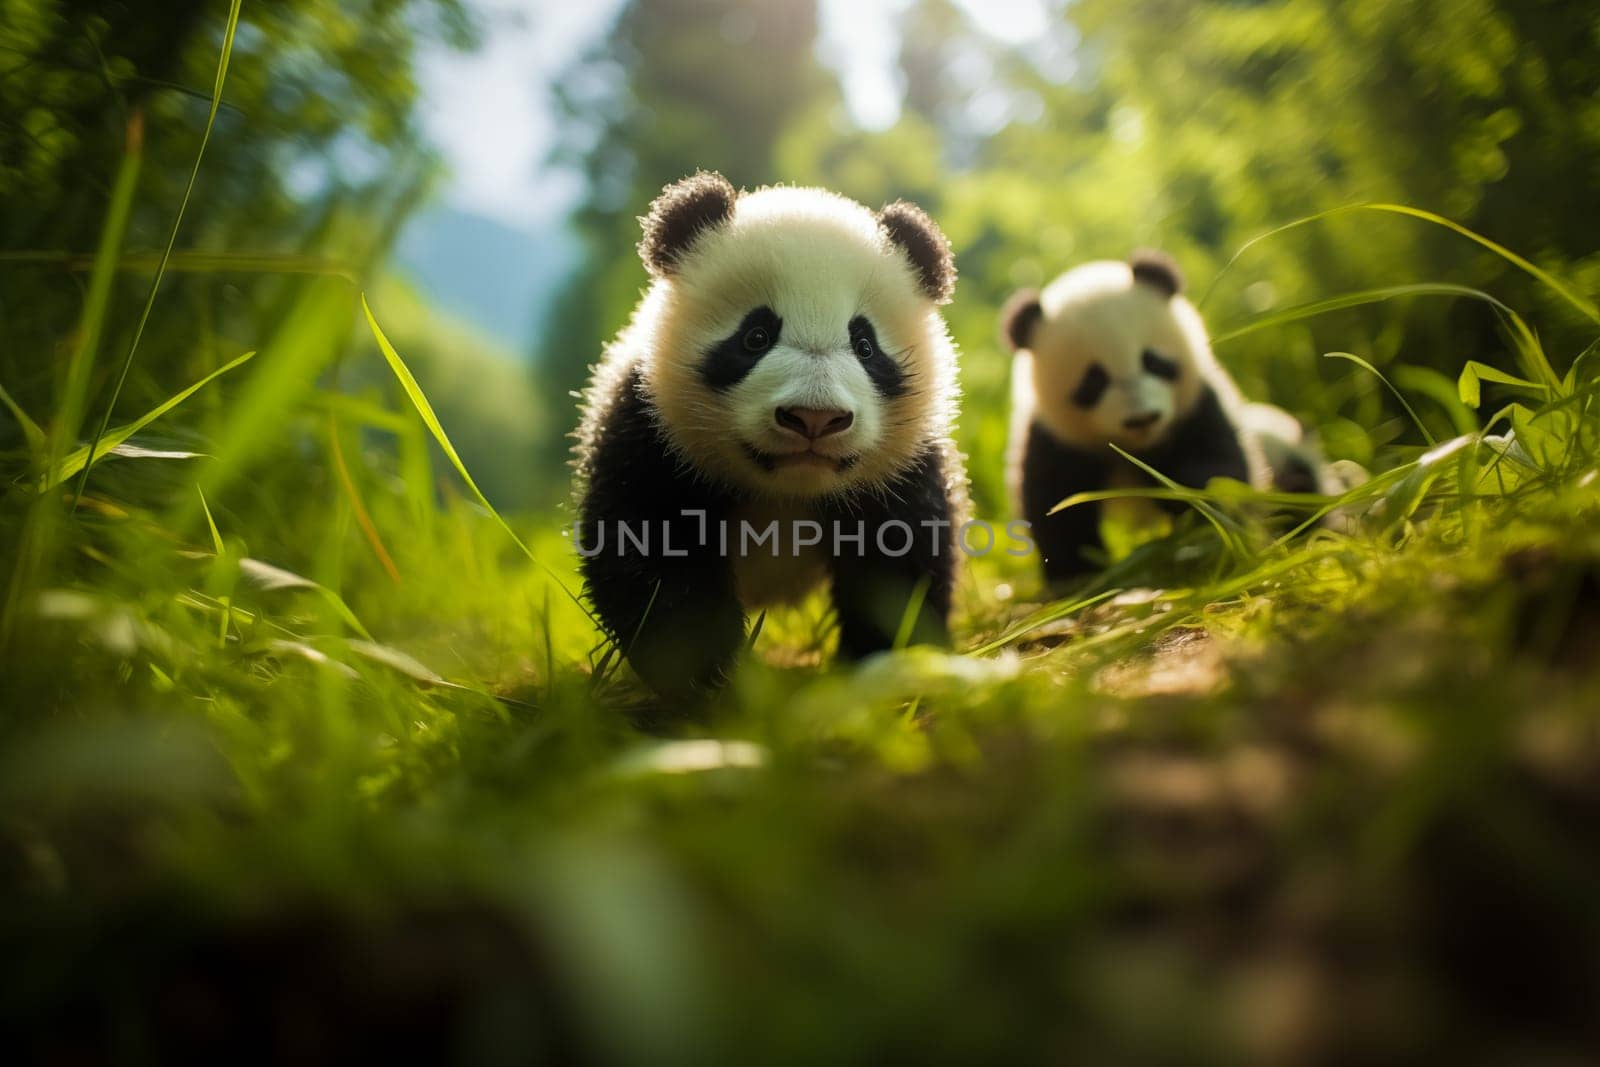 Cute panda cubs in a lush bamboo grove, The image showcases the beauty and serenity of nature and wildlife. Endangered species